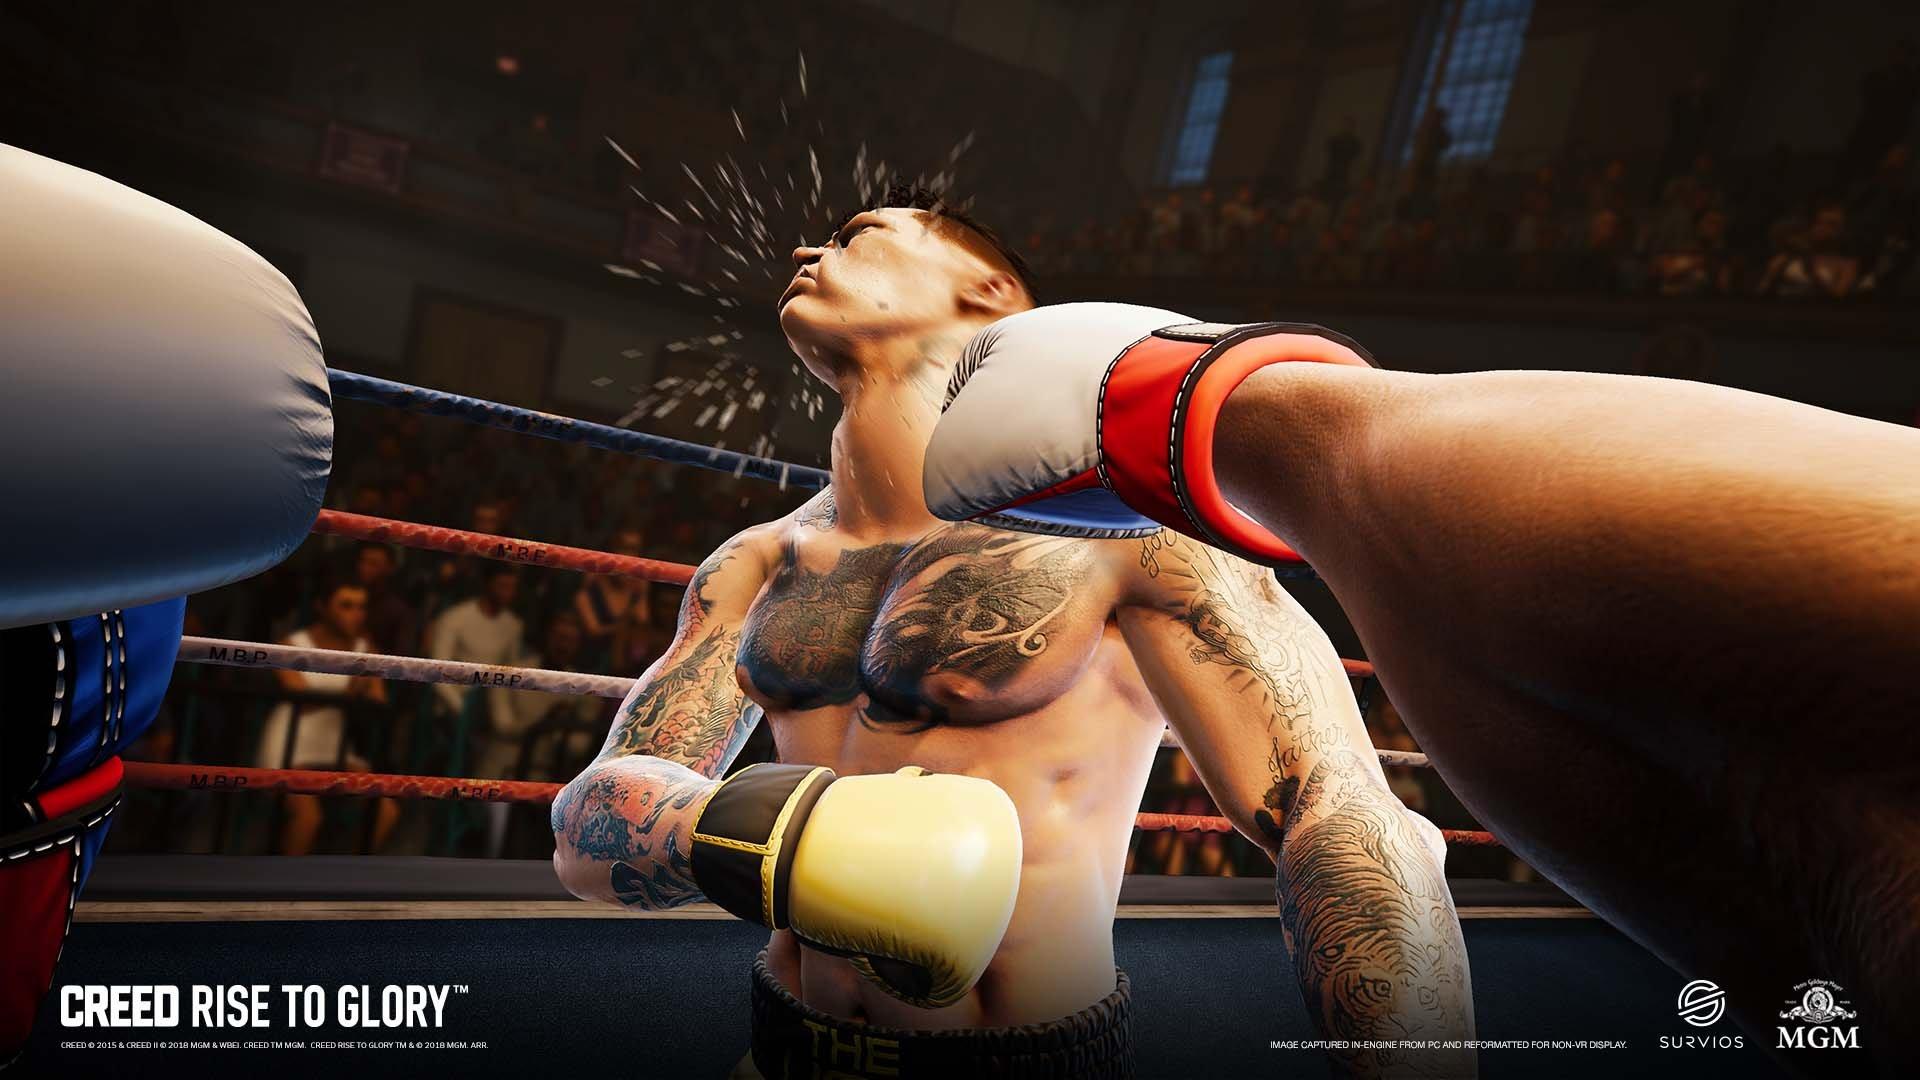 sony creed rise to glory vr